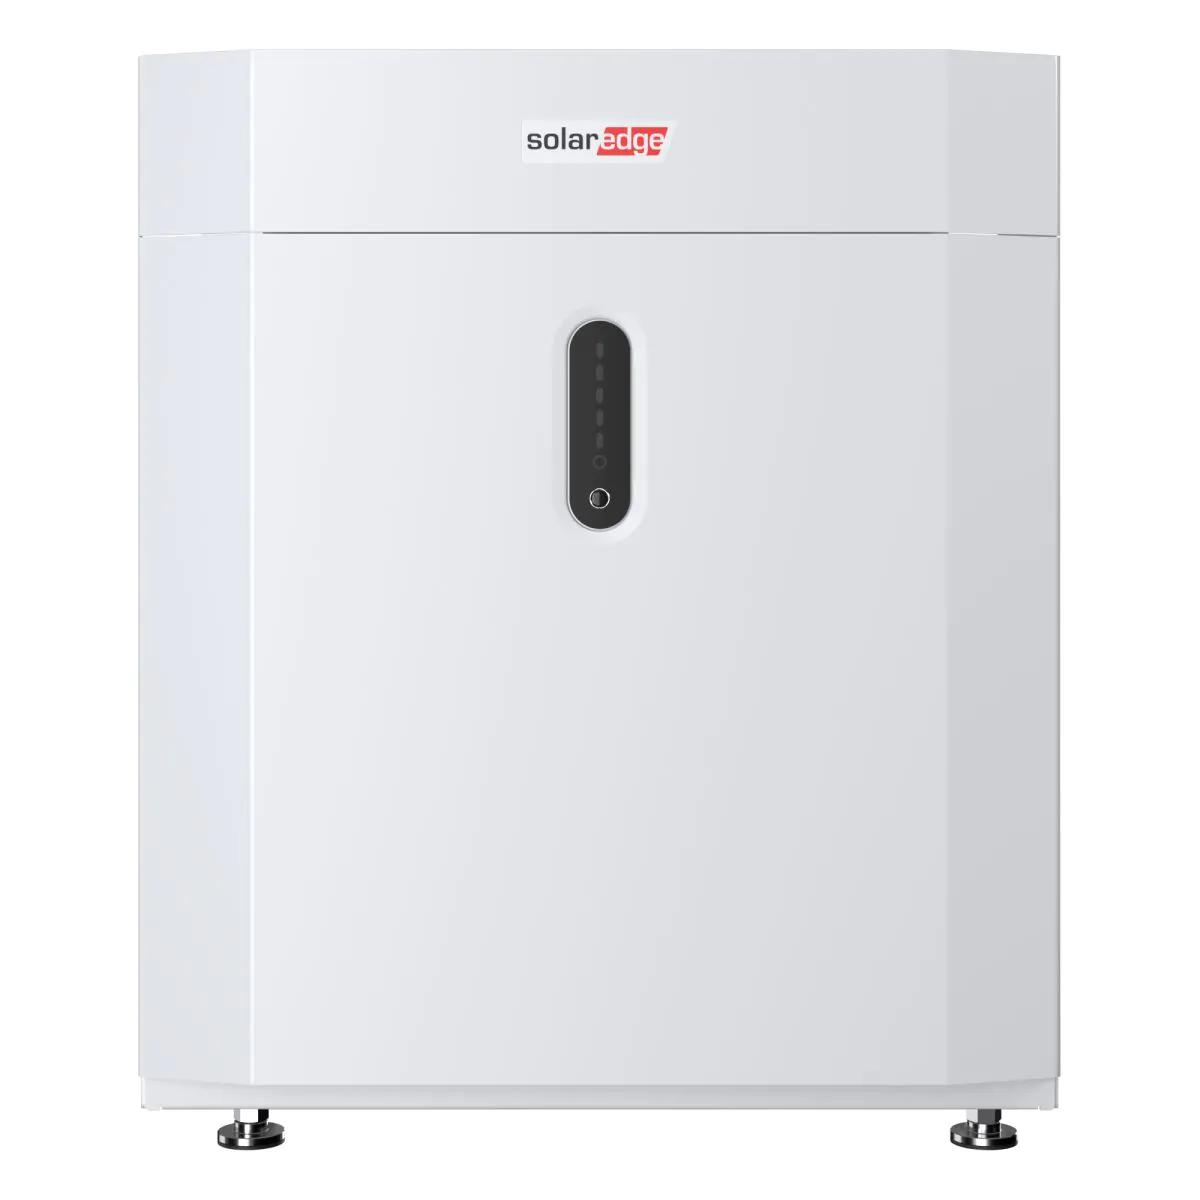 SolarEdge Home Batterie Niederspannung 4.6-kWh Pack BAT-05K48MOB-01